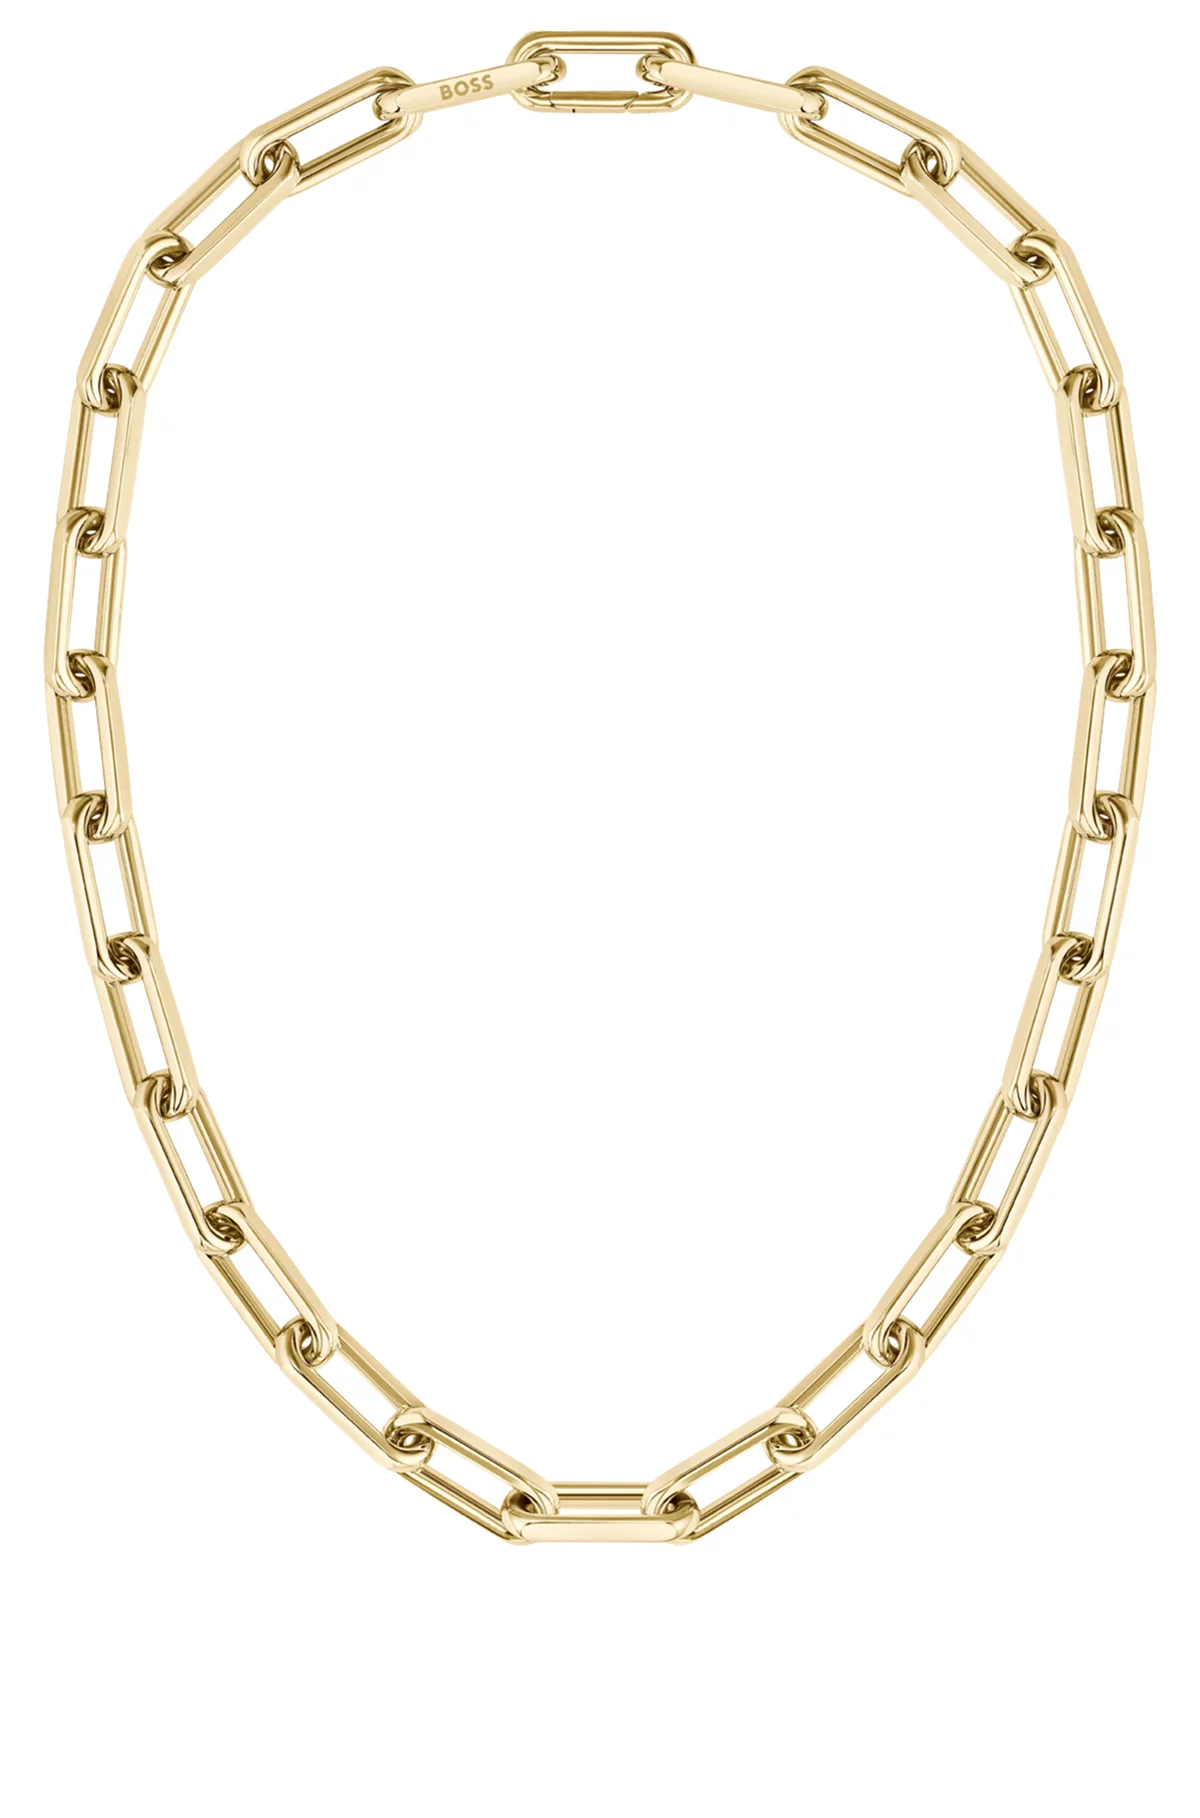 GOLD-TONE NECKLACE WITH BRANDED LINK